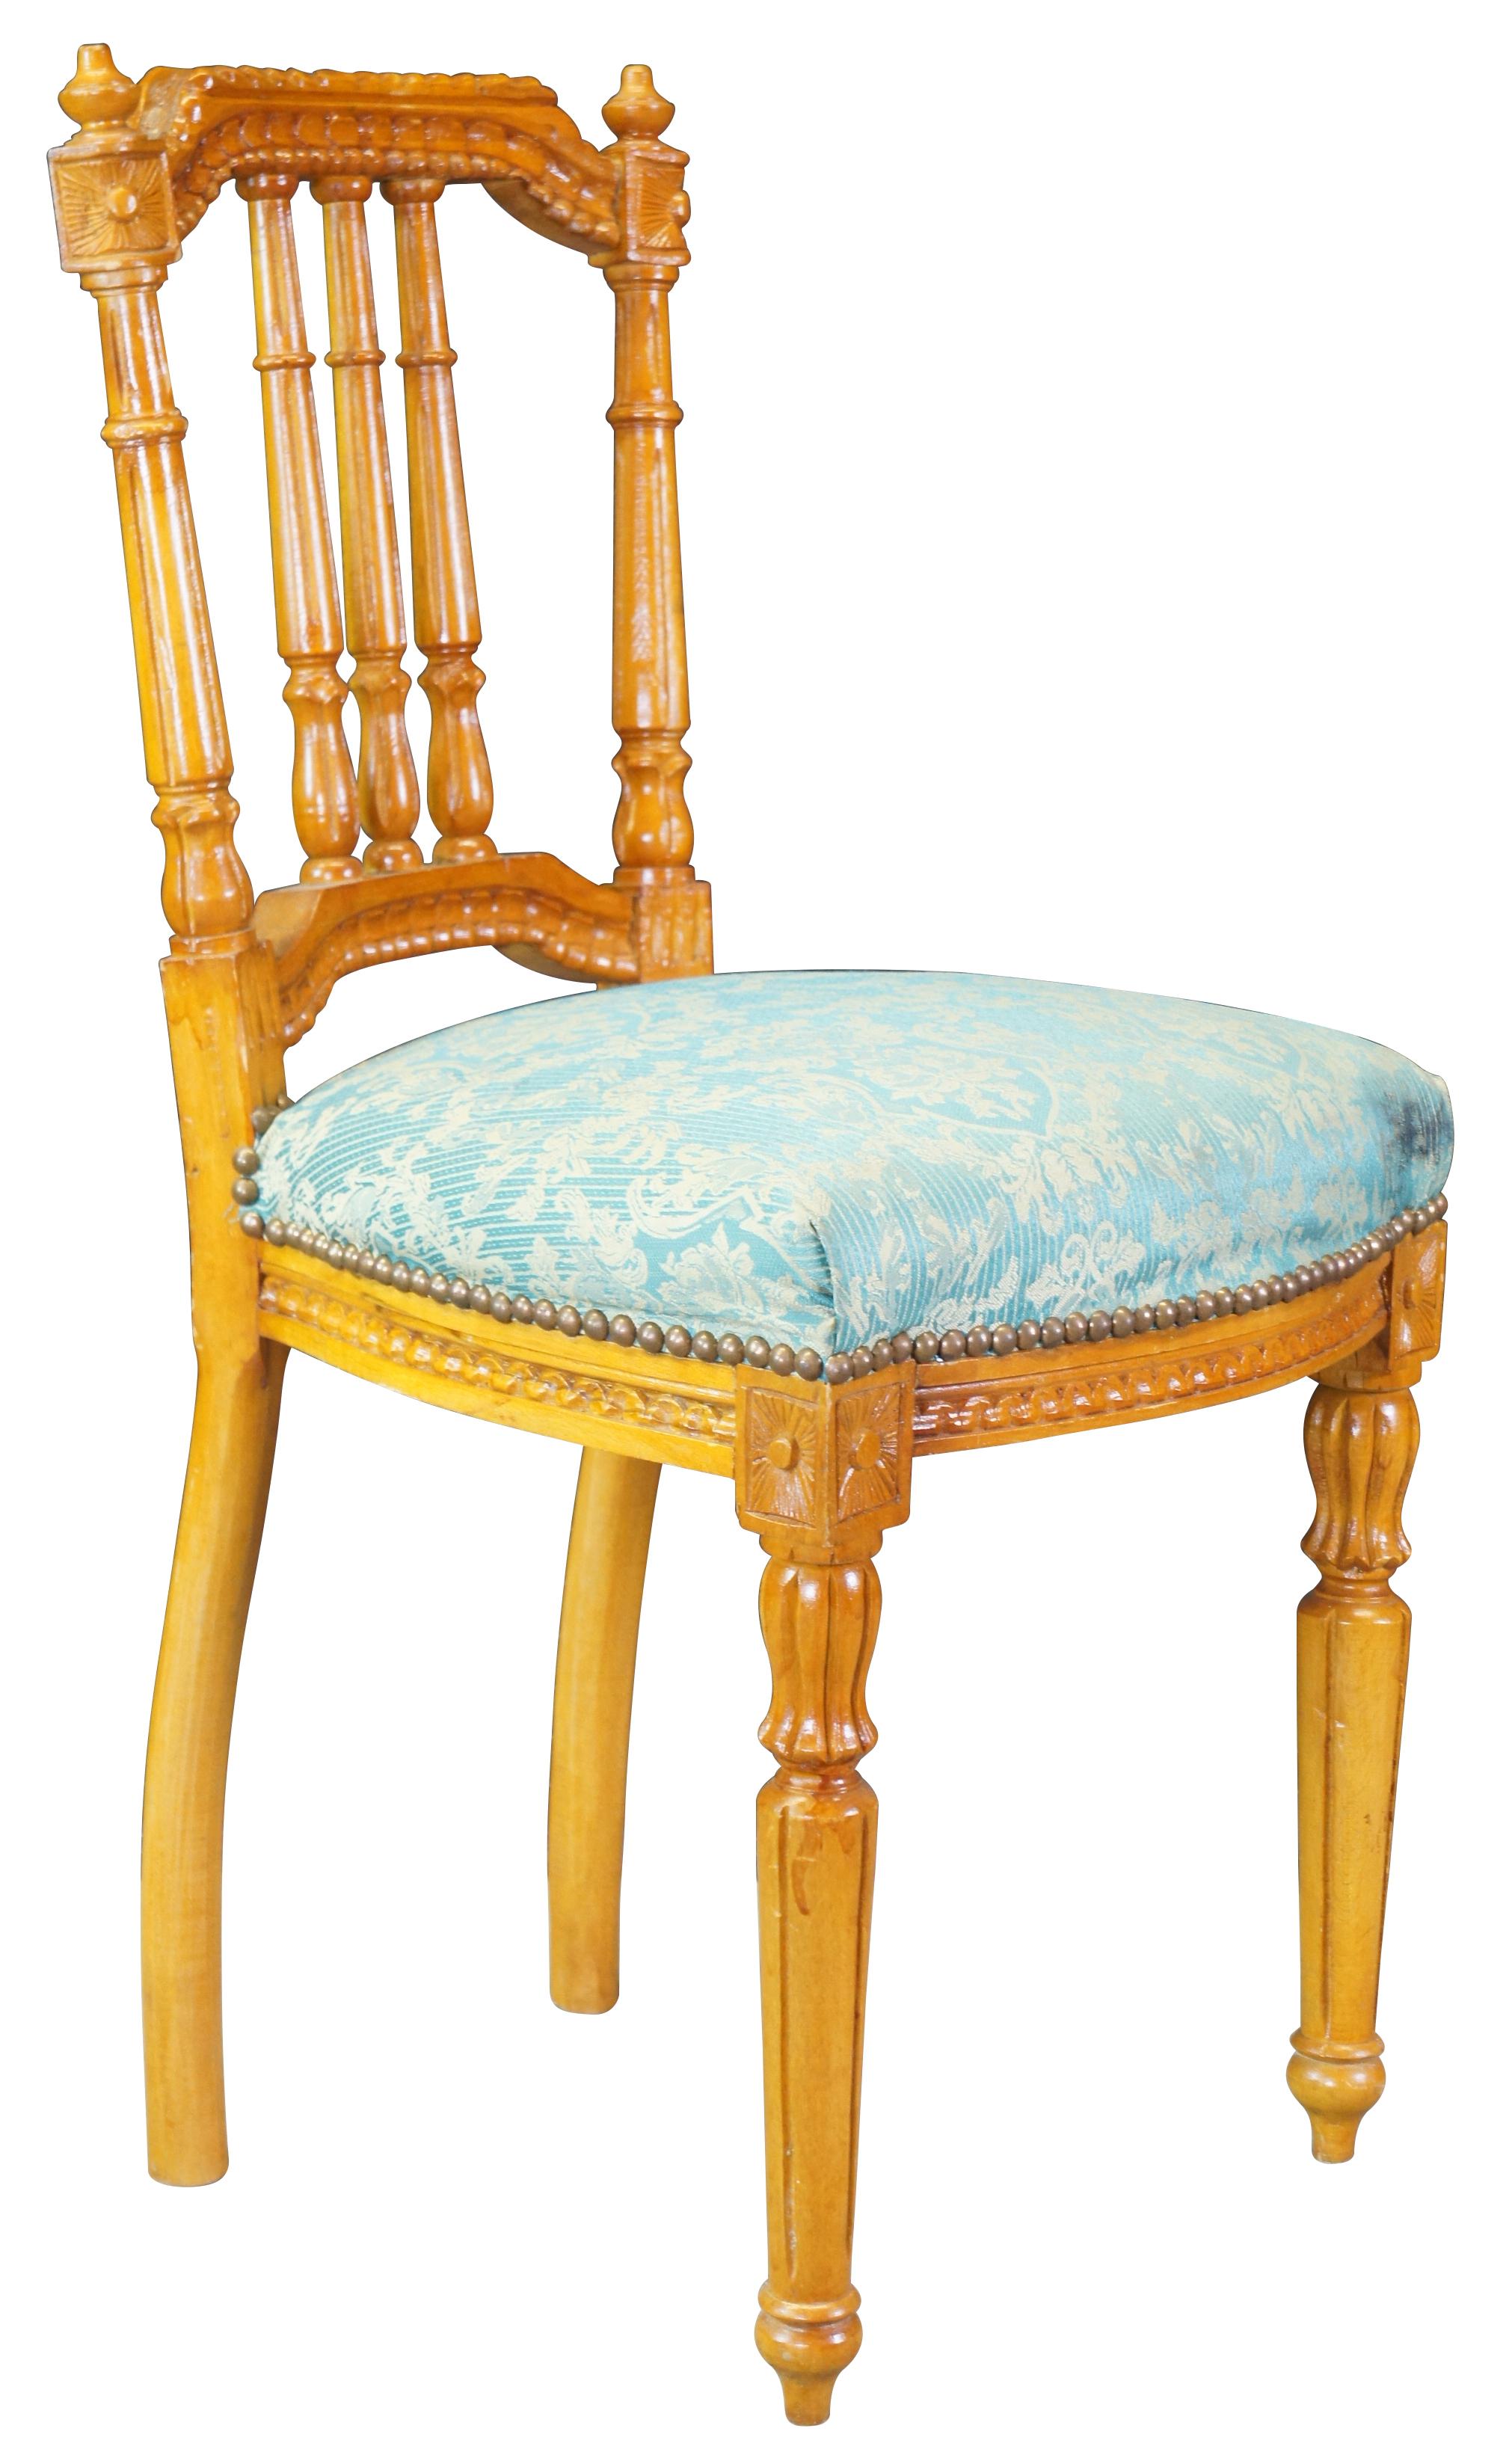 2 Antique French Louis XVI Carved Birch Side Accent Chairs Brocade Seat In Good Condition For Sale In Dayton, OH